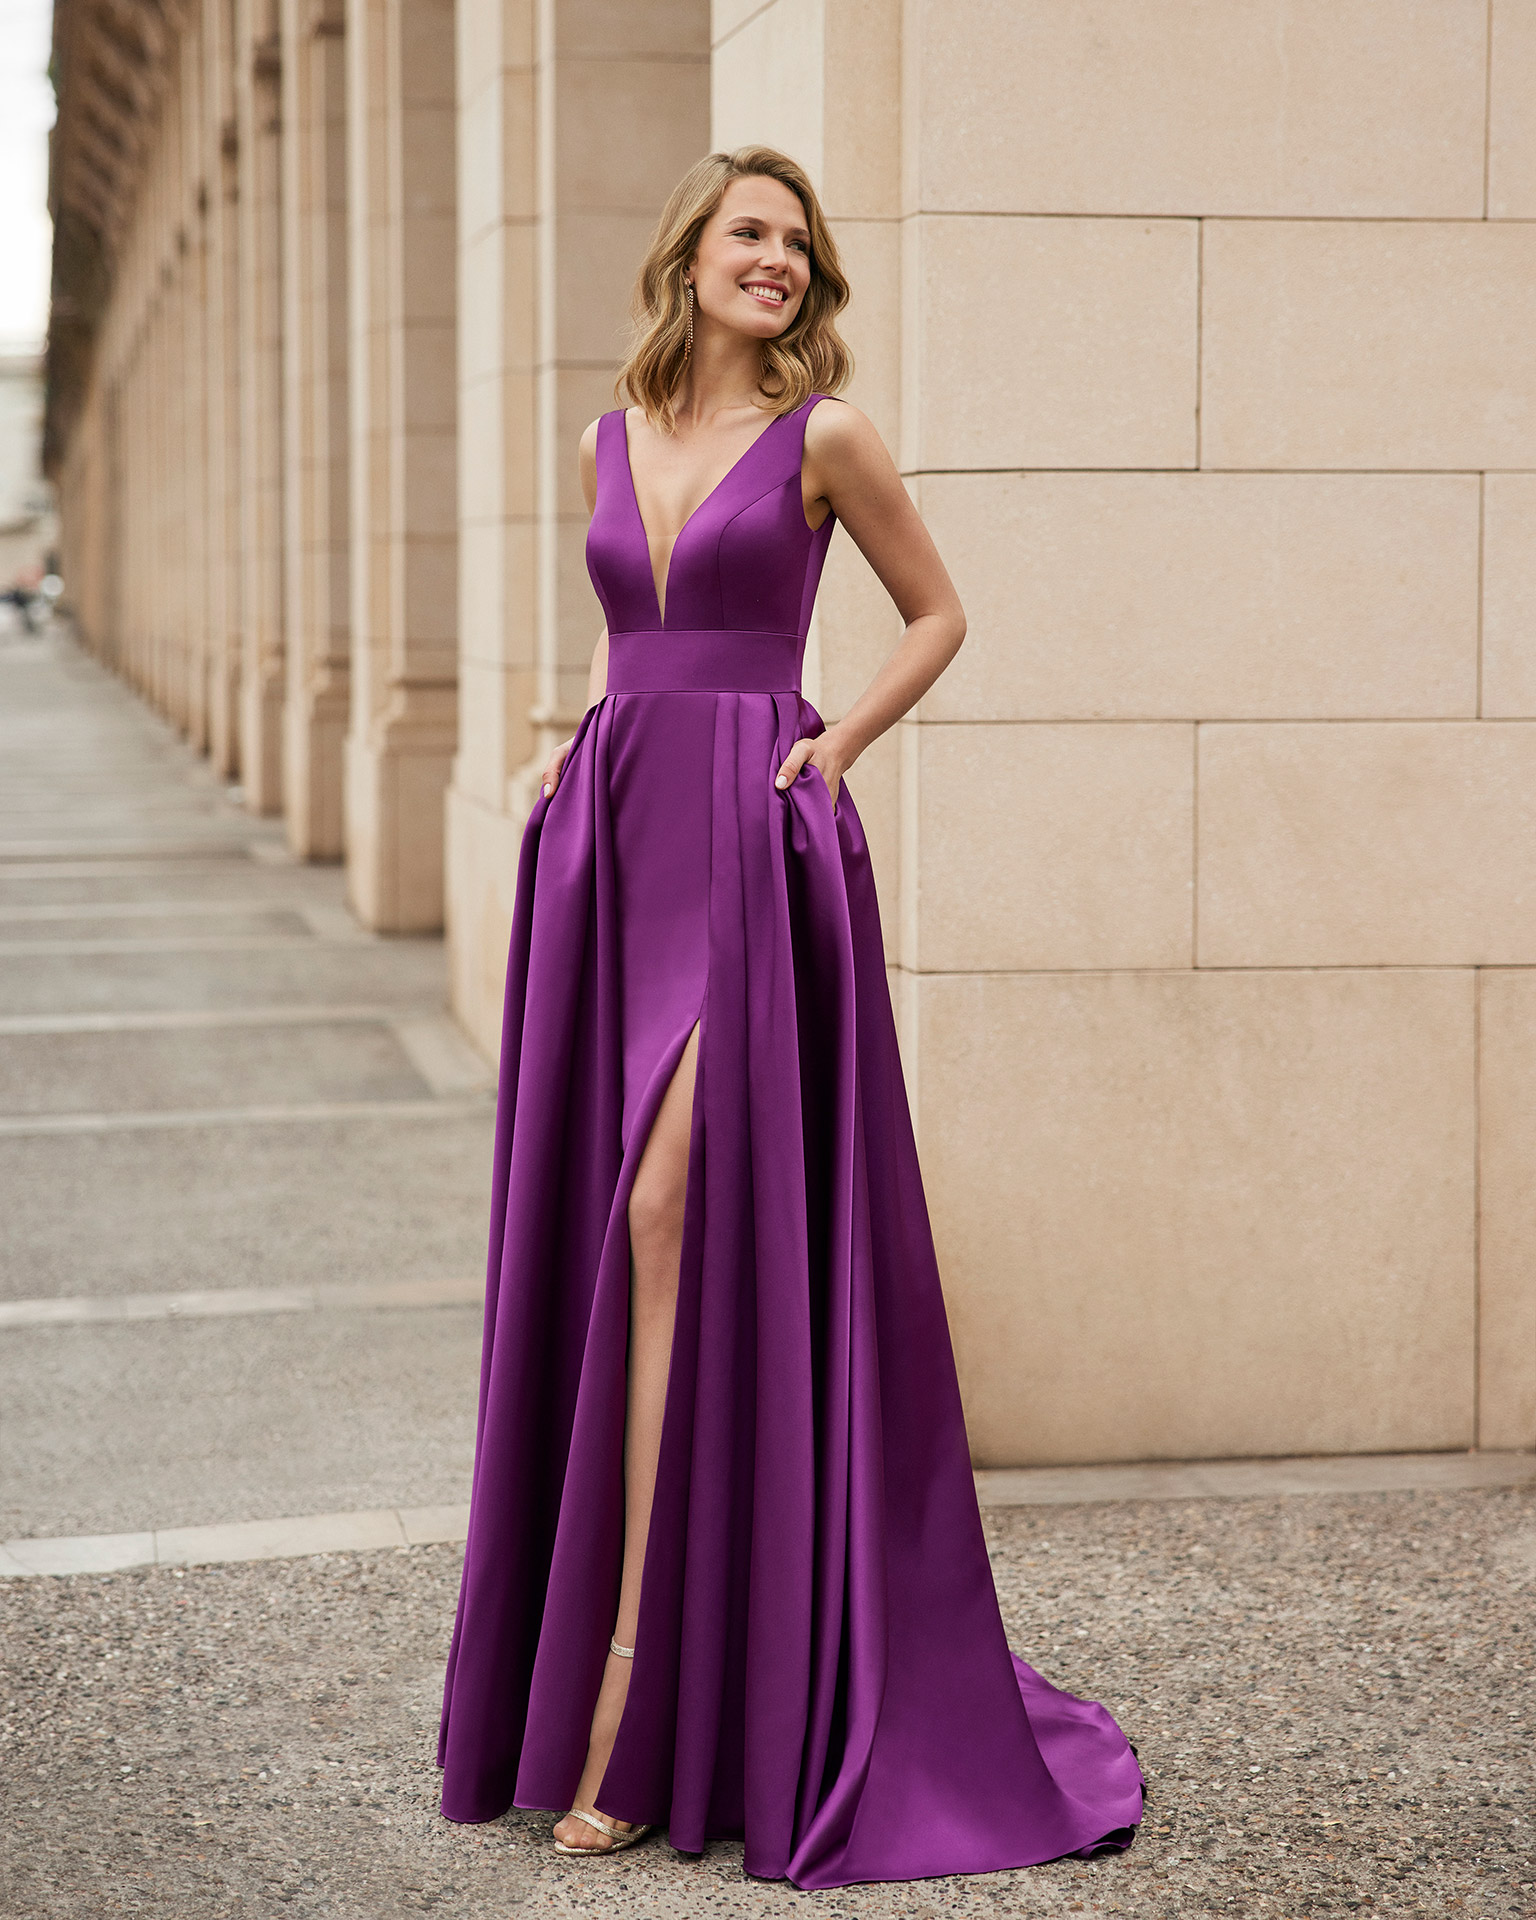 Long evening dress made of satin. Marfil Barcelona design with a V-neckline, and a pleated skirt with a slit. MARFIL_BARCELONA.